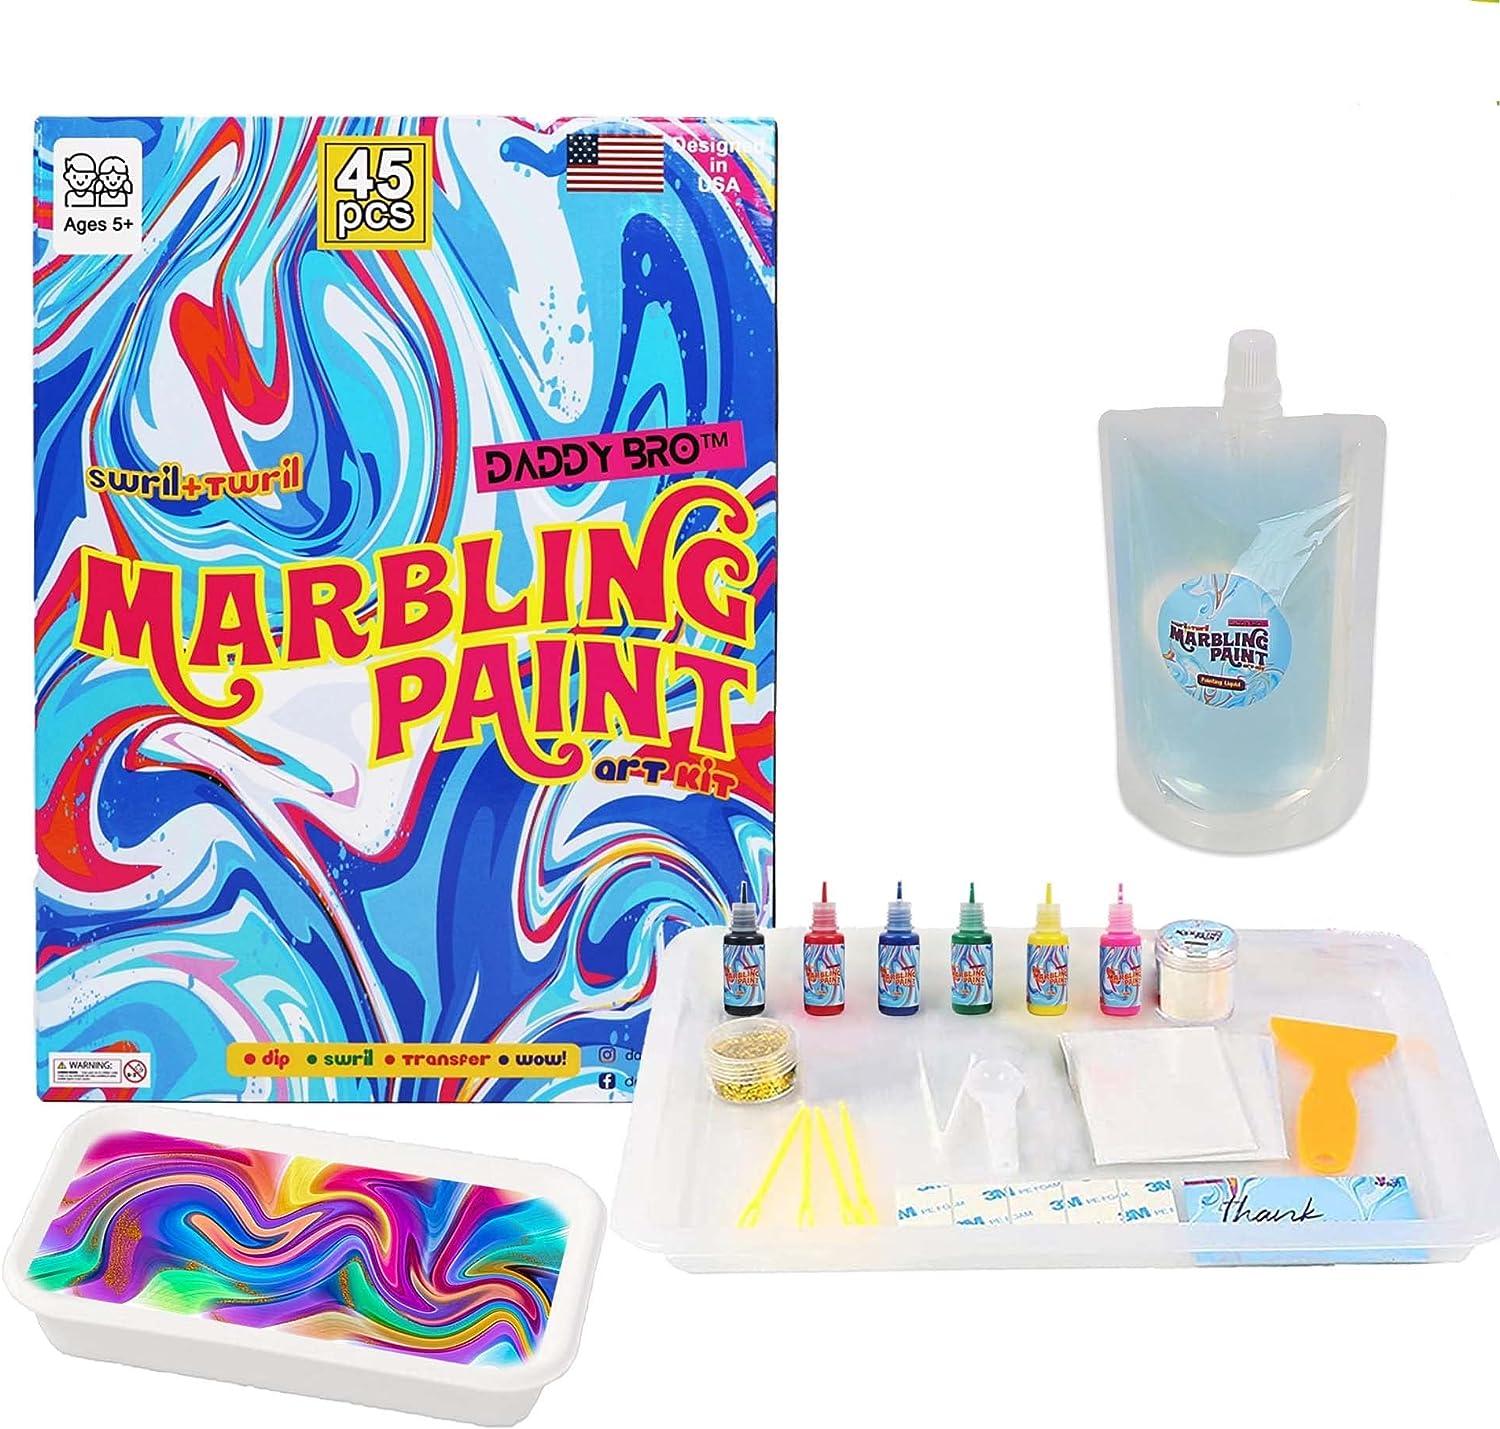 Marbling Painting Kit 12 Colors  Water Marbling Paint Art Kit - 6/12 Color  - Aliexpress